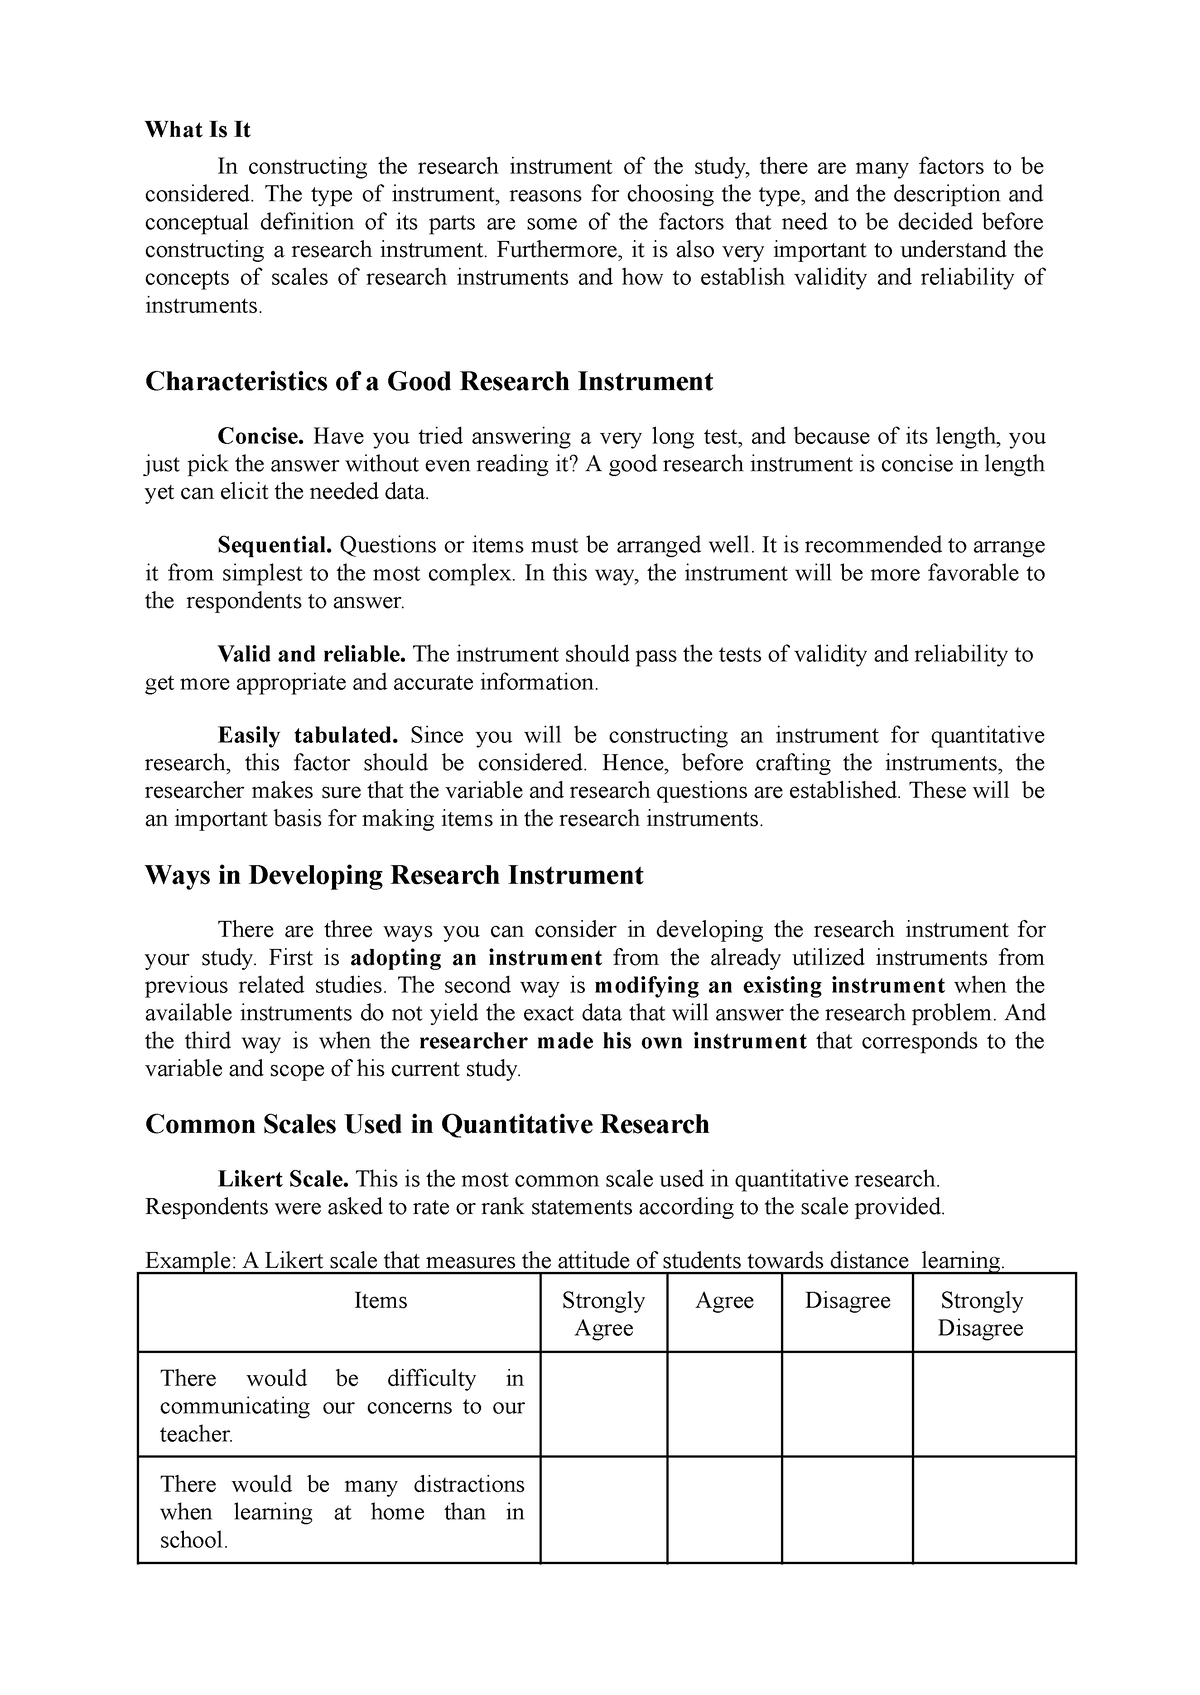 research instruments definition pdf